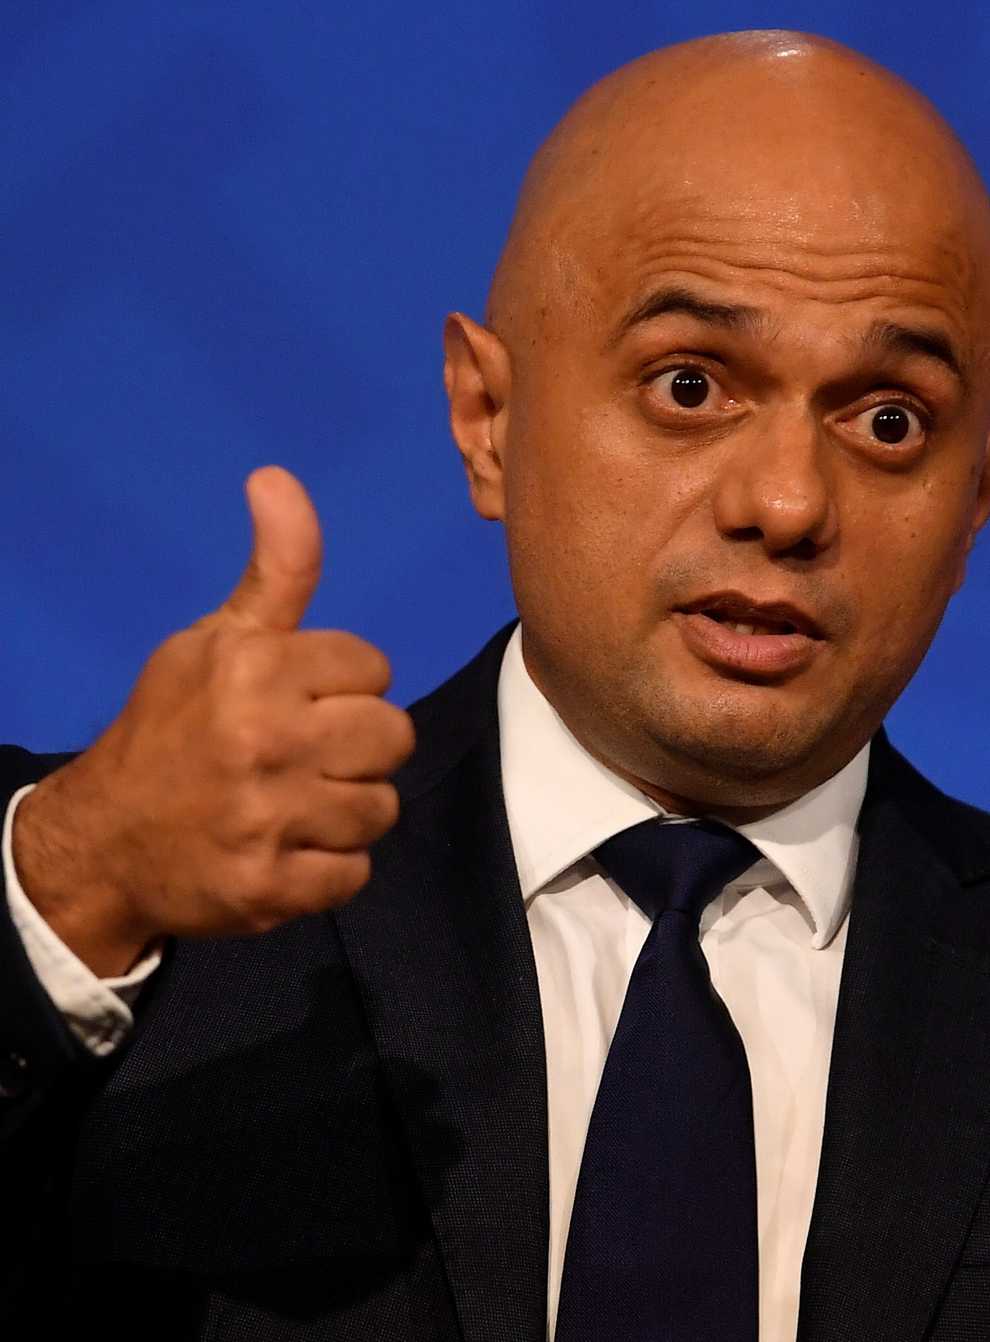 Sajid Javid is facing questions over share options (Toby Melville/PA)